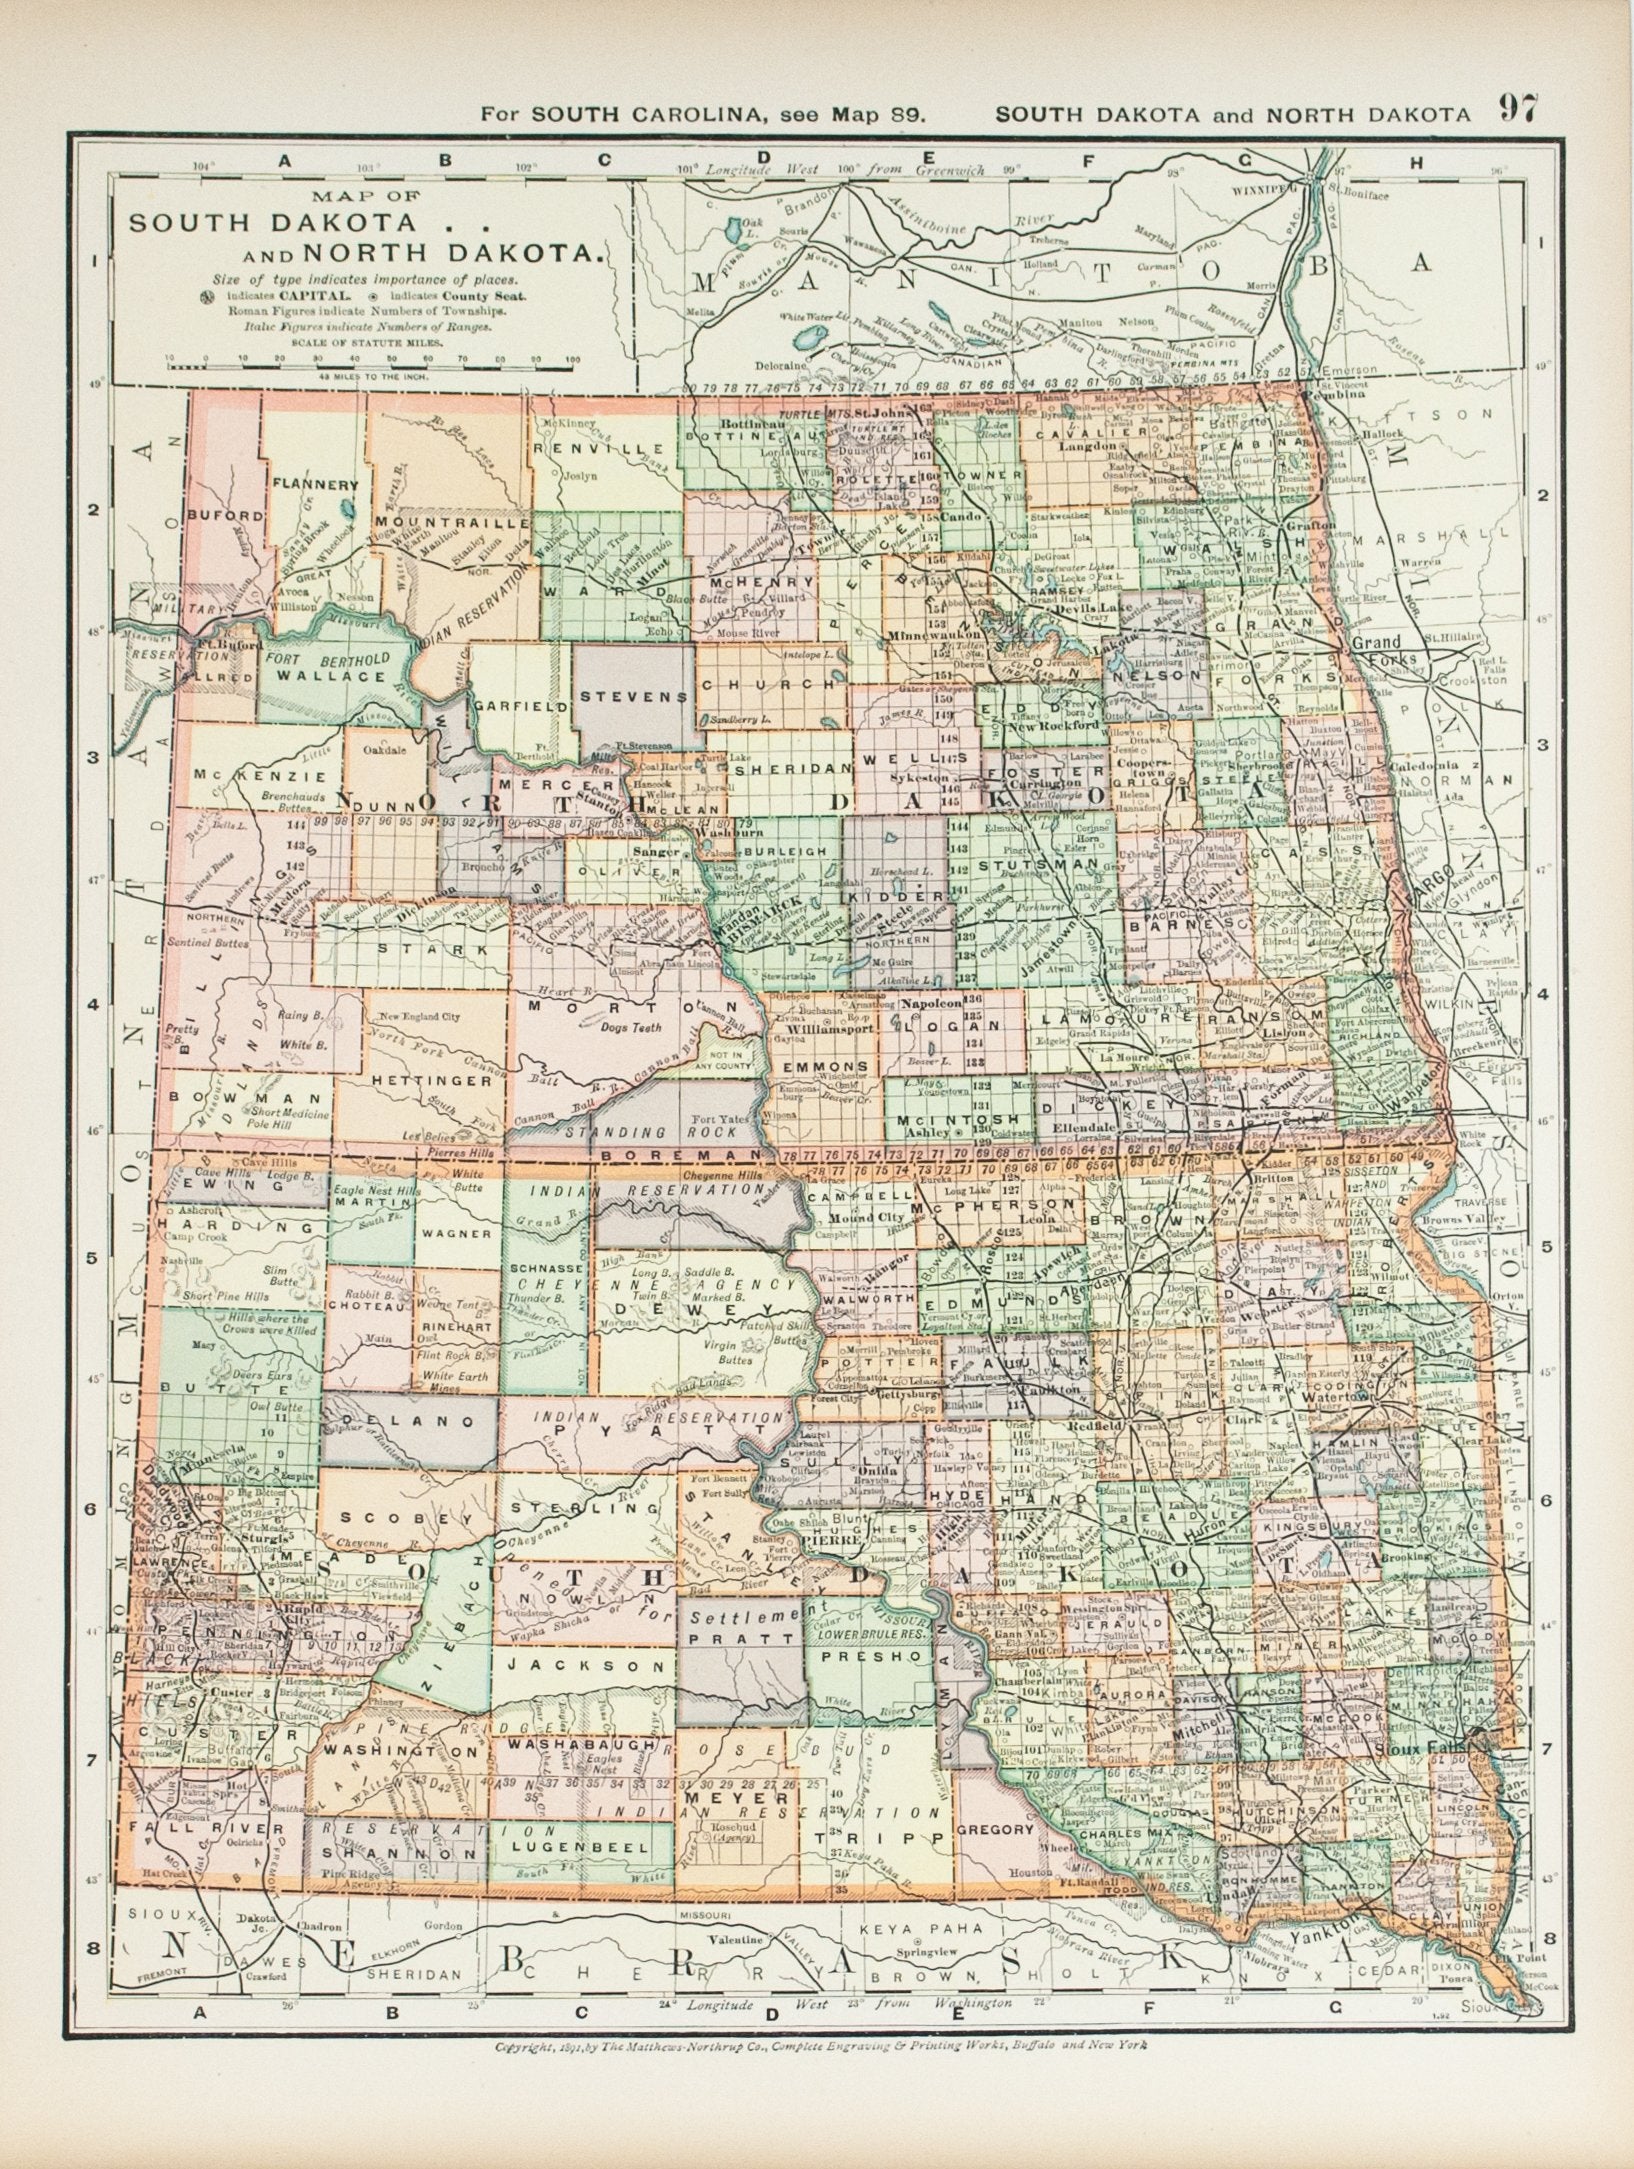 map of north and south dakota 1891 Map Of North Dakota And South Dakota Historic Accents map of north and south dakota